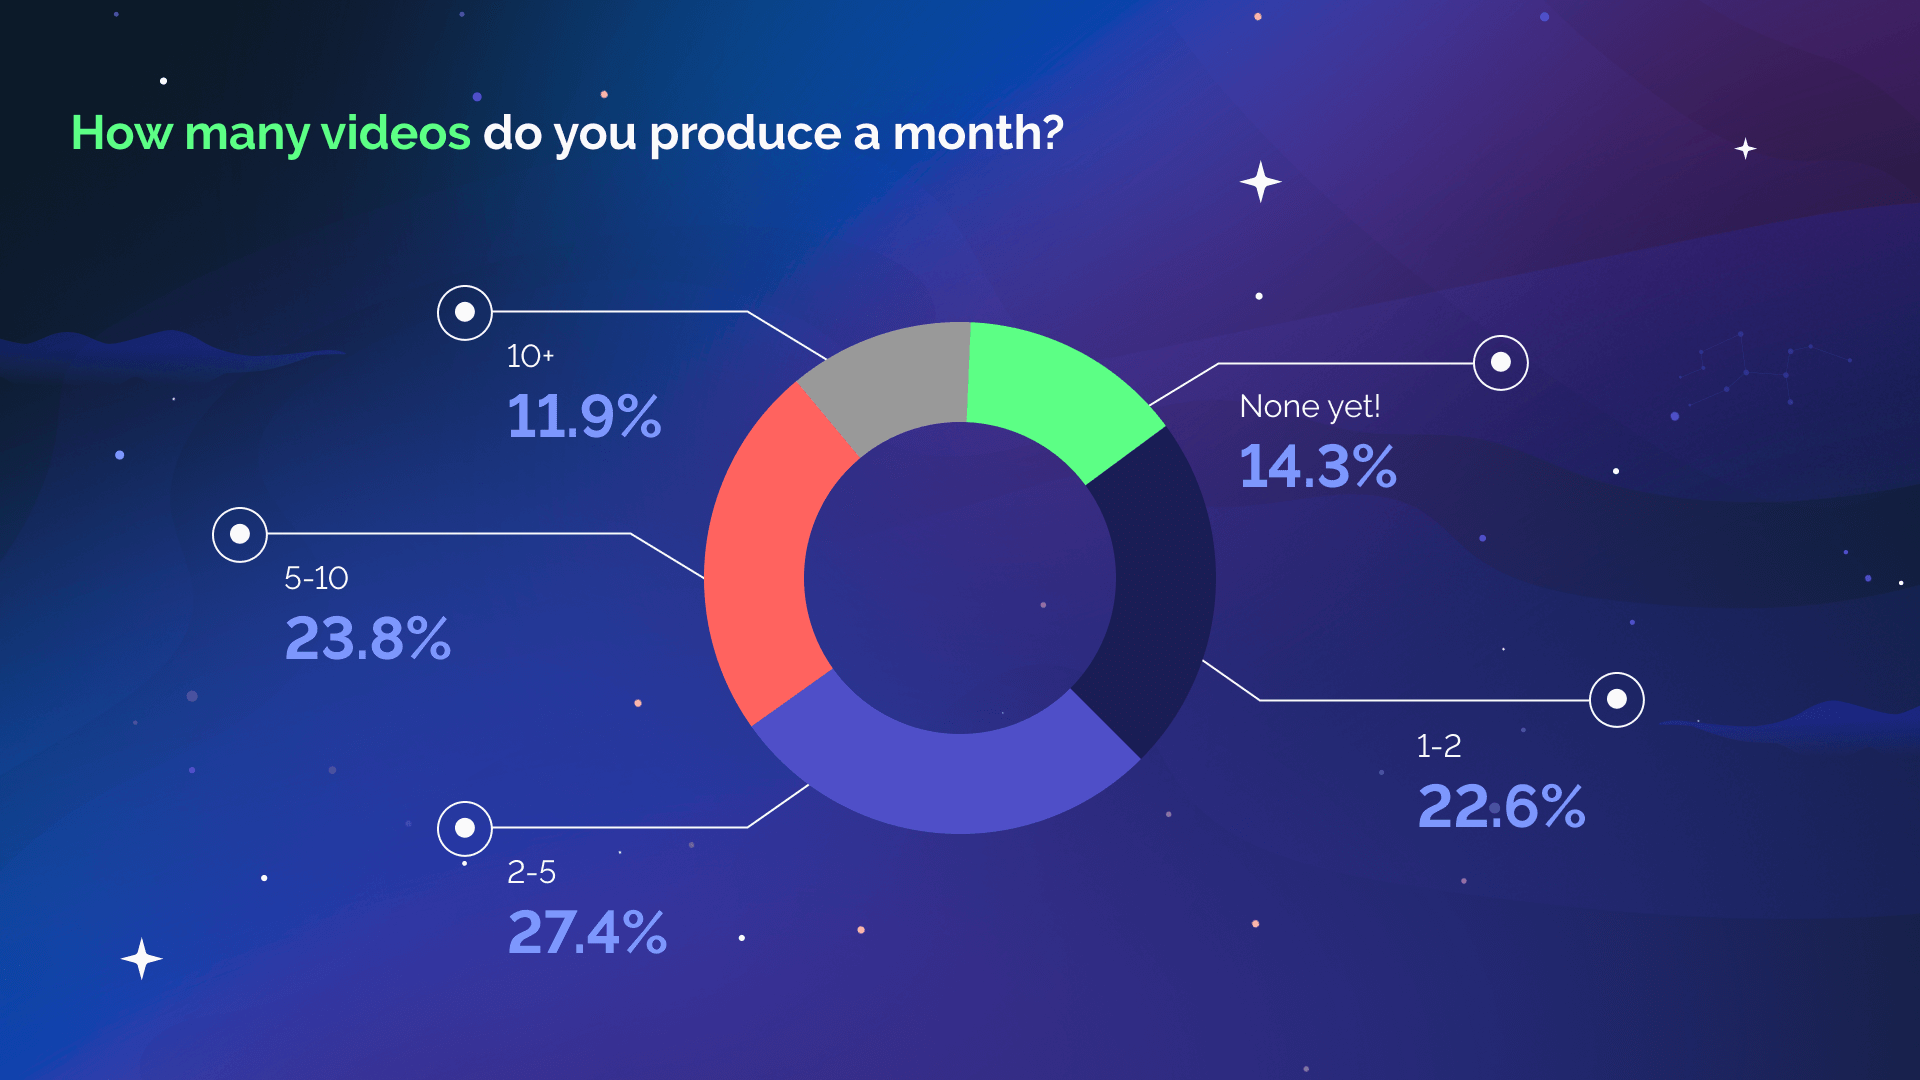 How many videos do you produce a month?